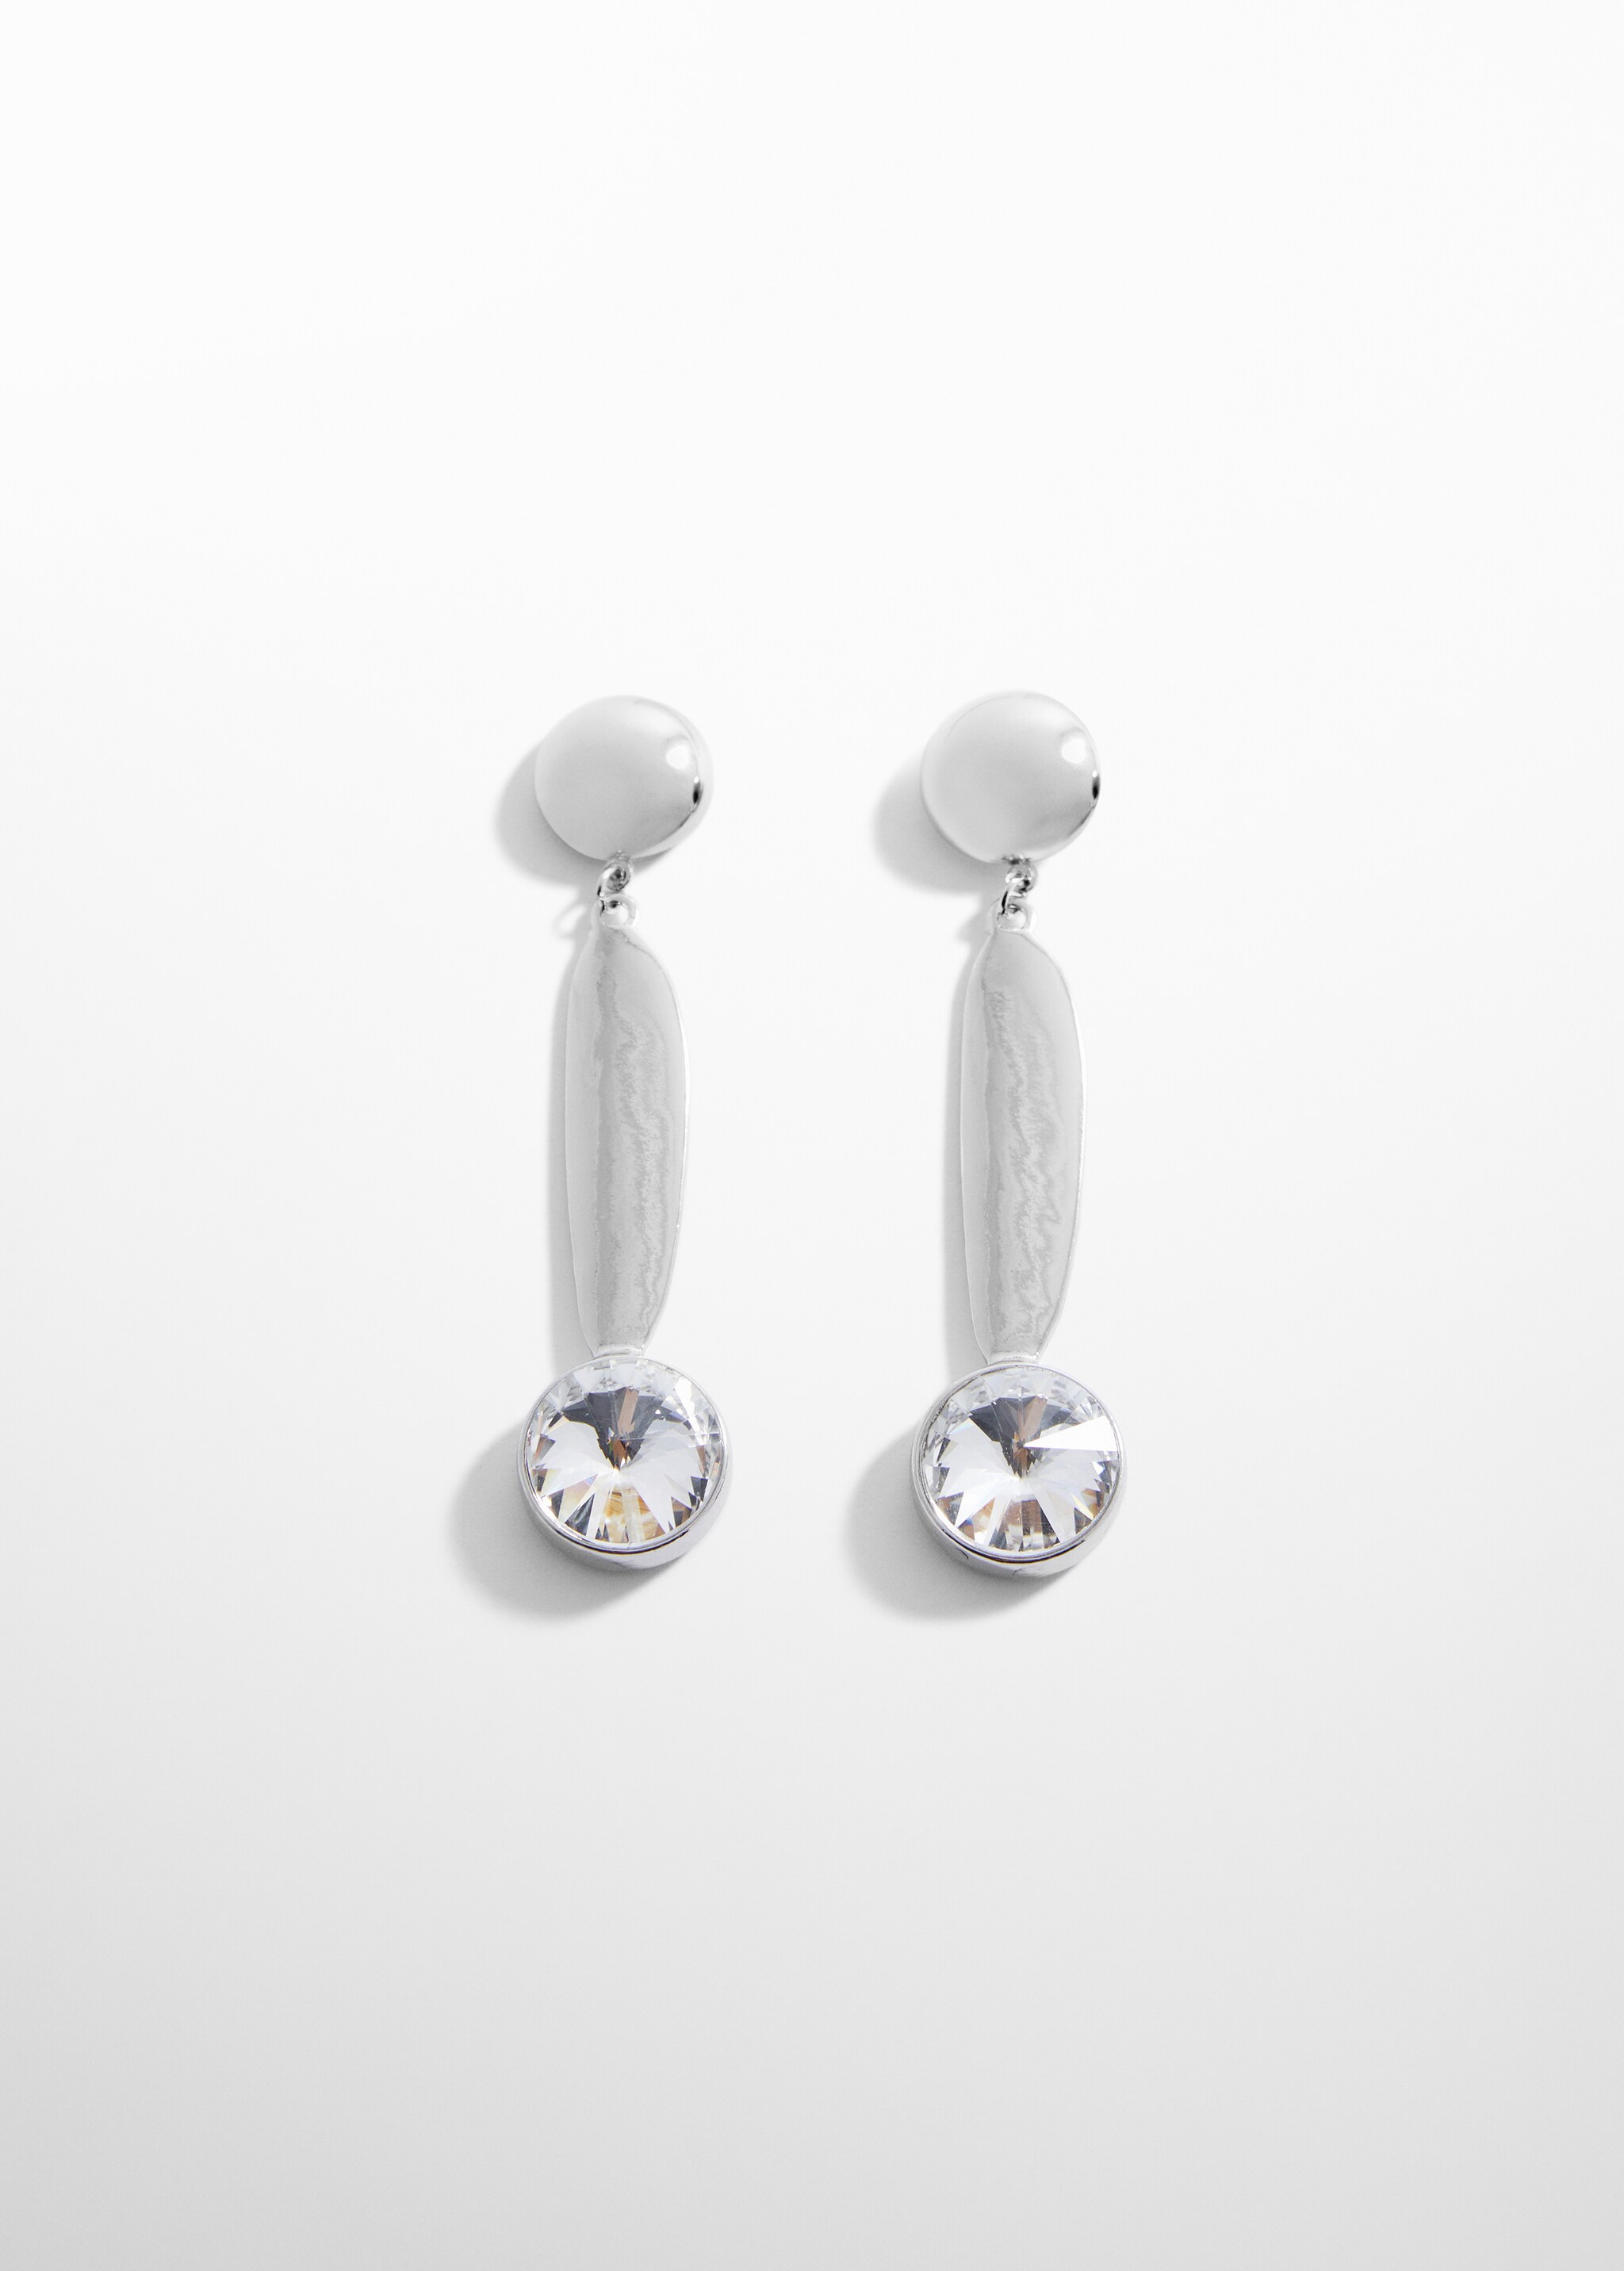 Long crystal earrings  - Article without model